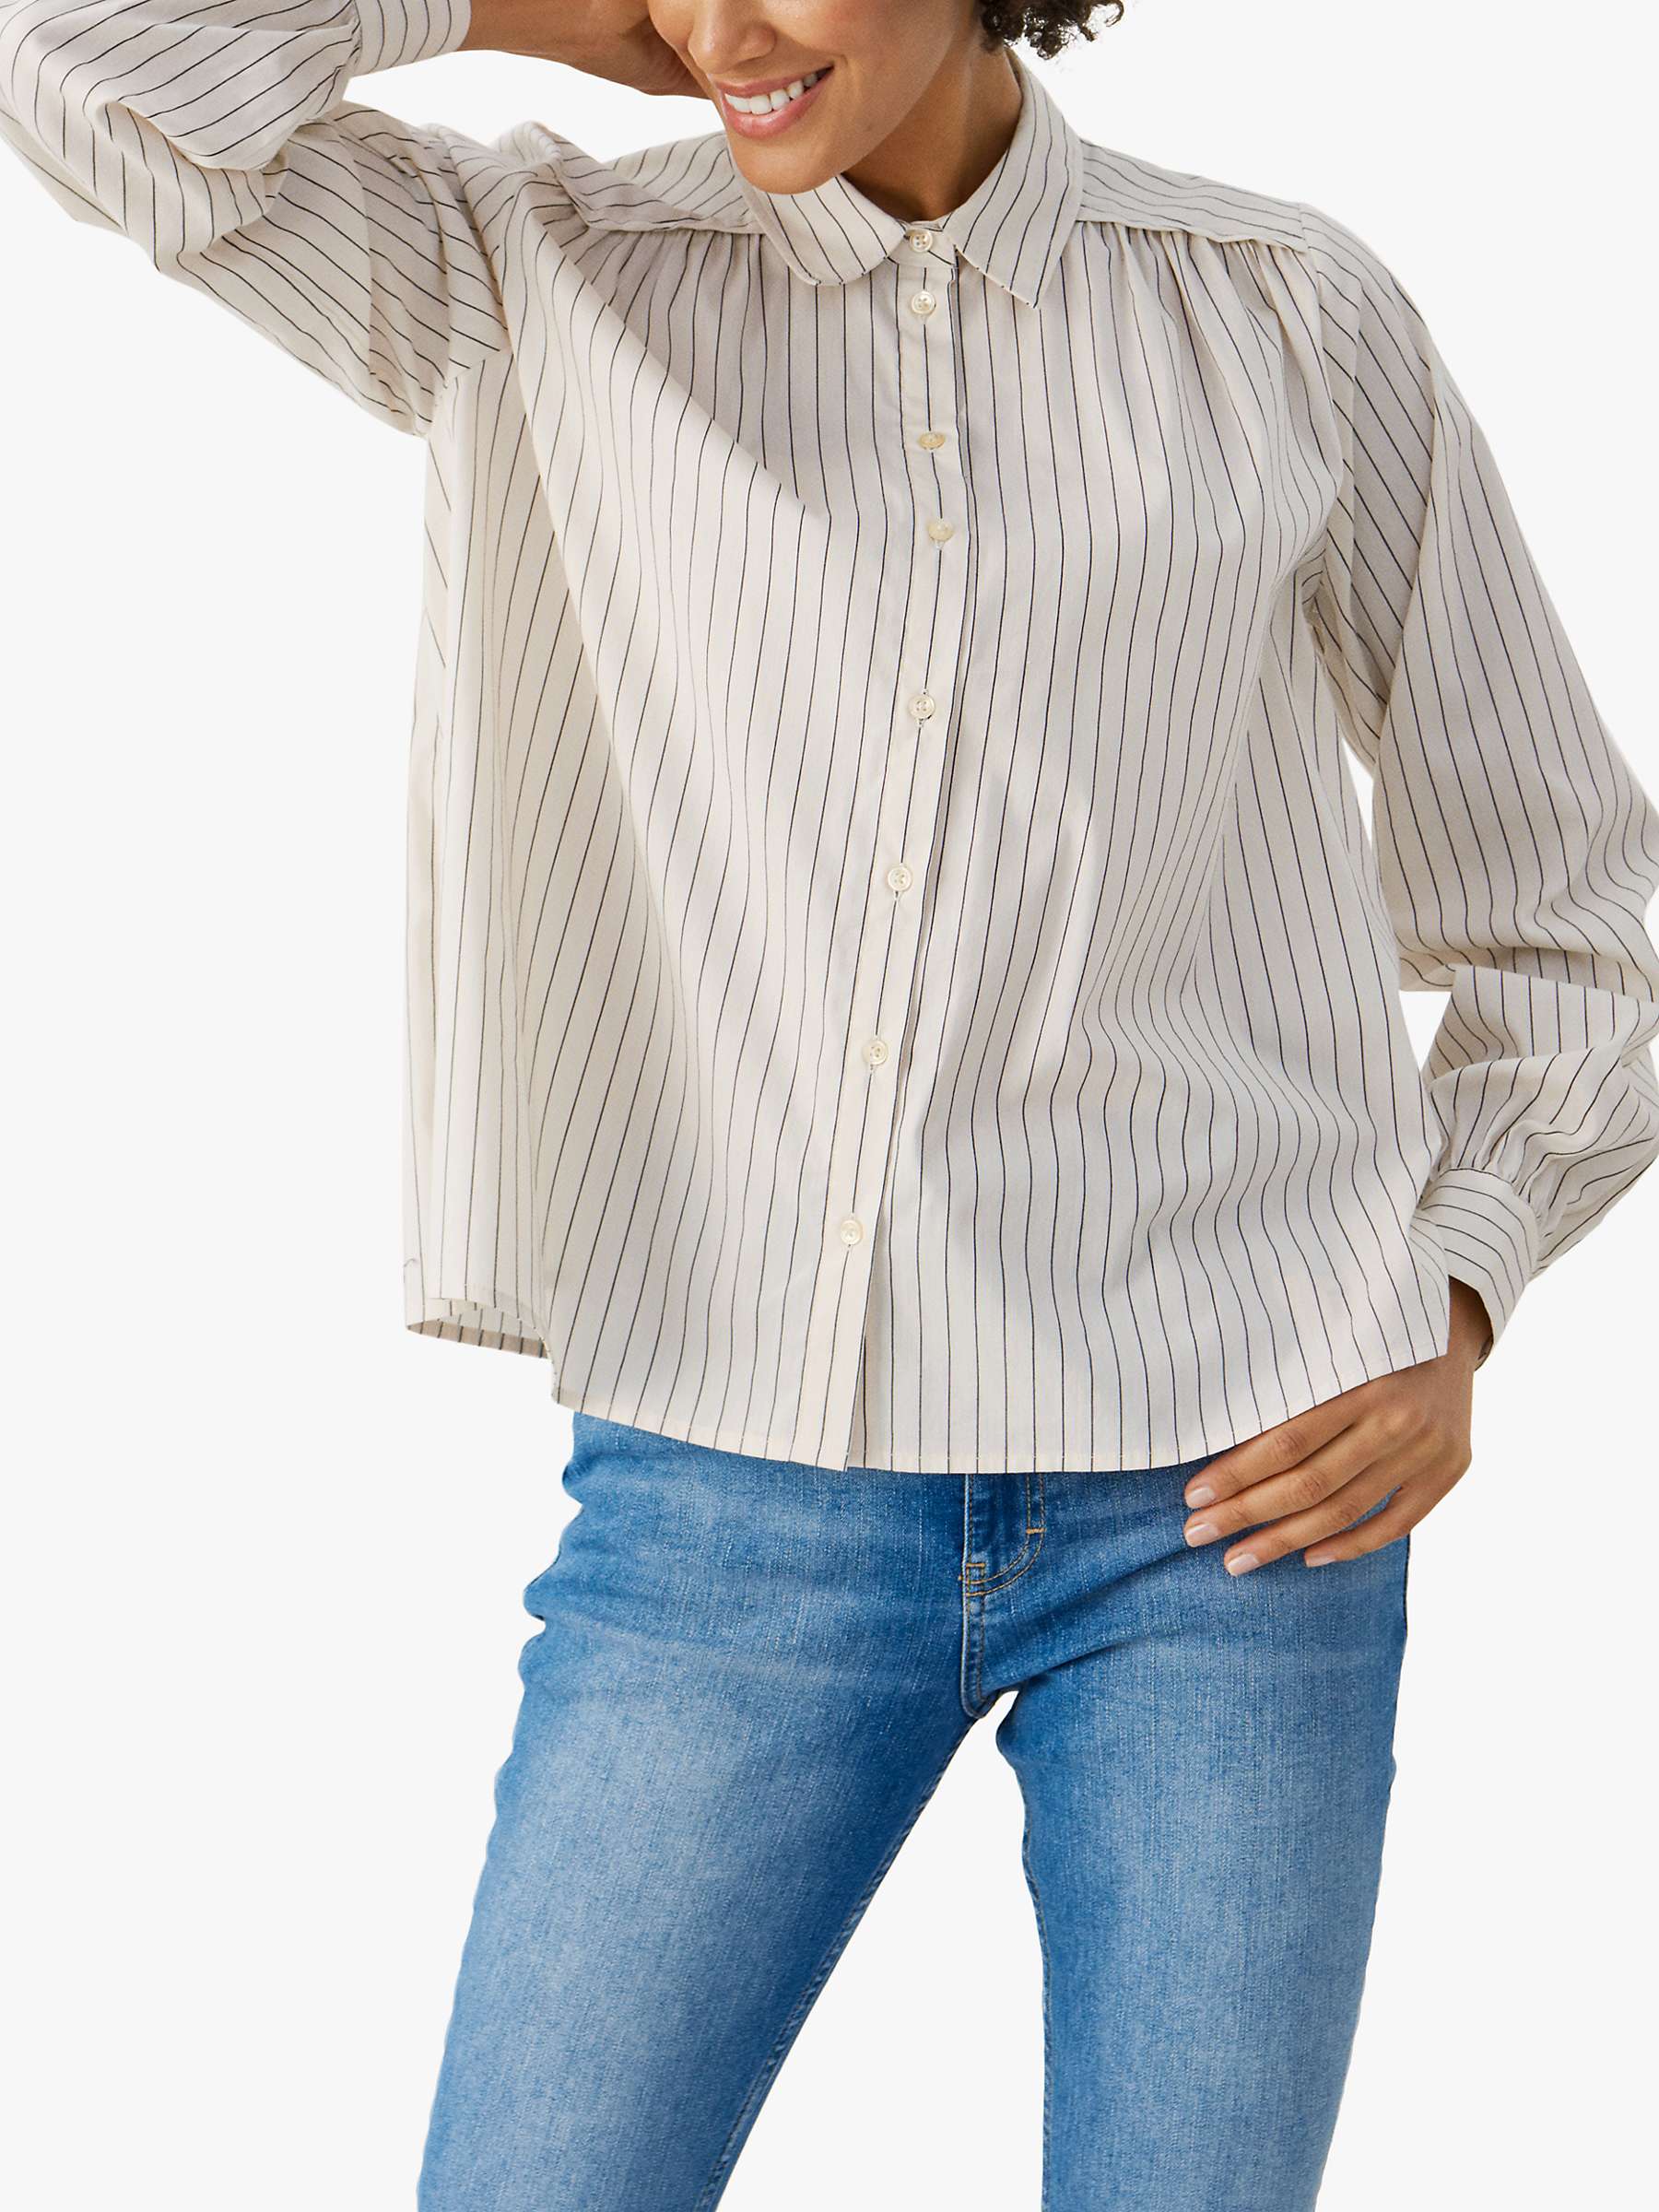 Buy Part Two Terna Relaxed Fit Striped Shirt, Whitecap Gray Online at johnlewis.com